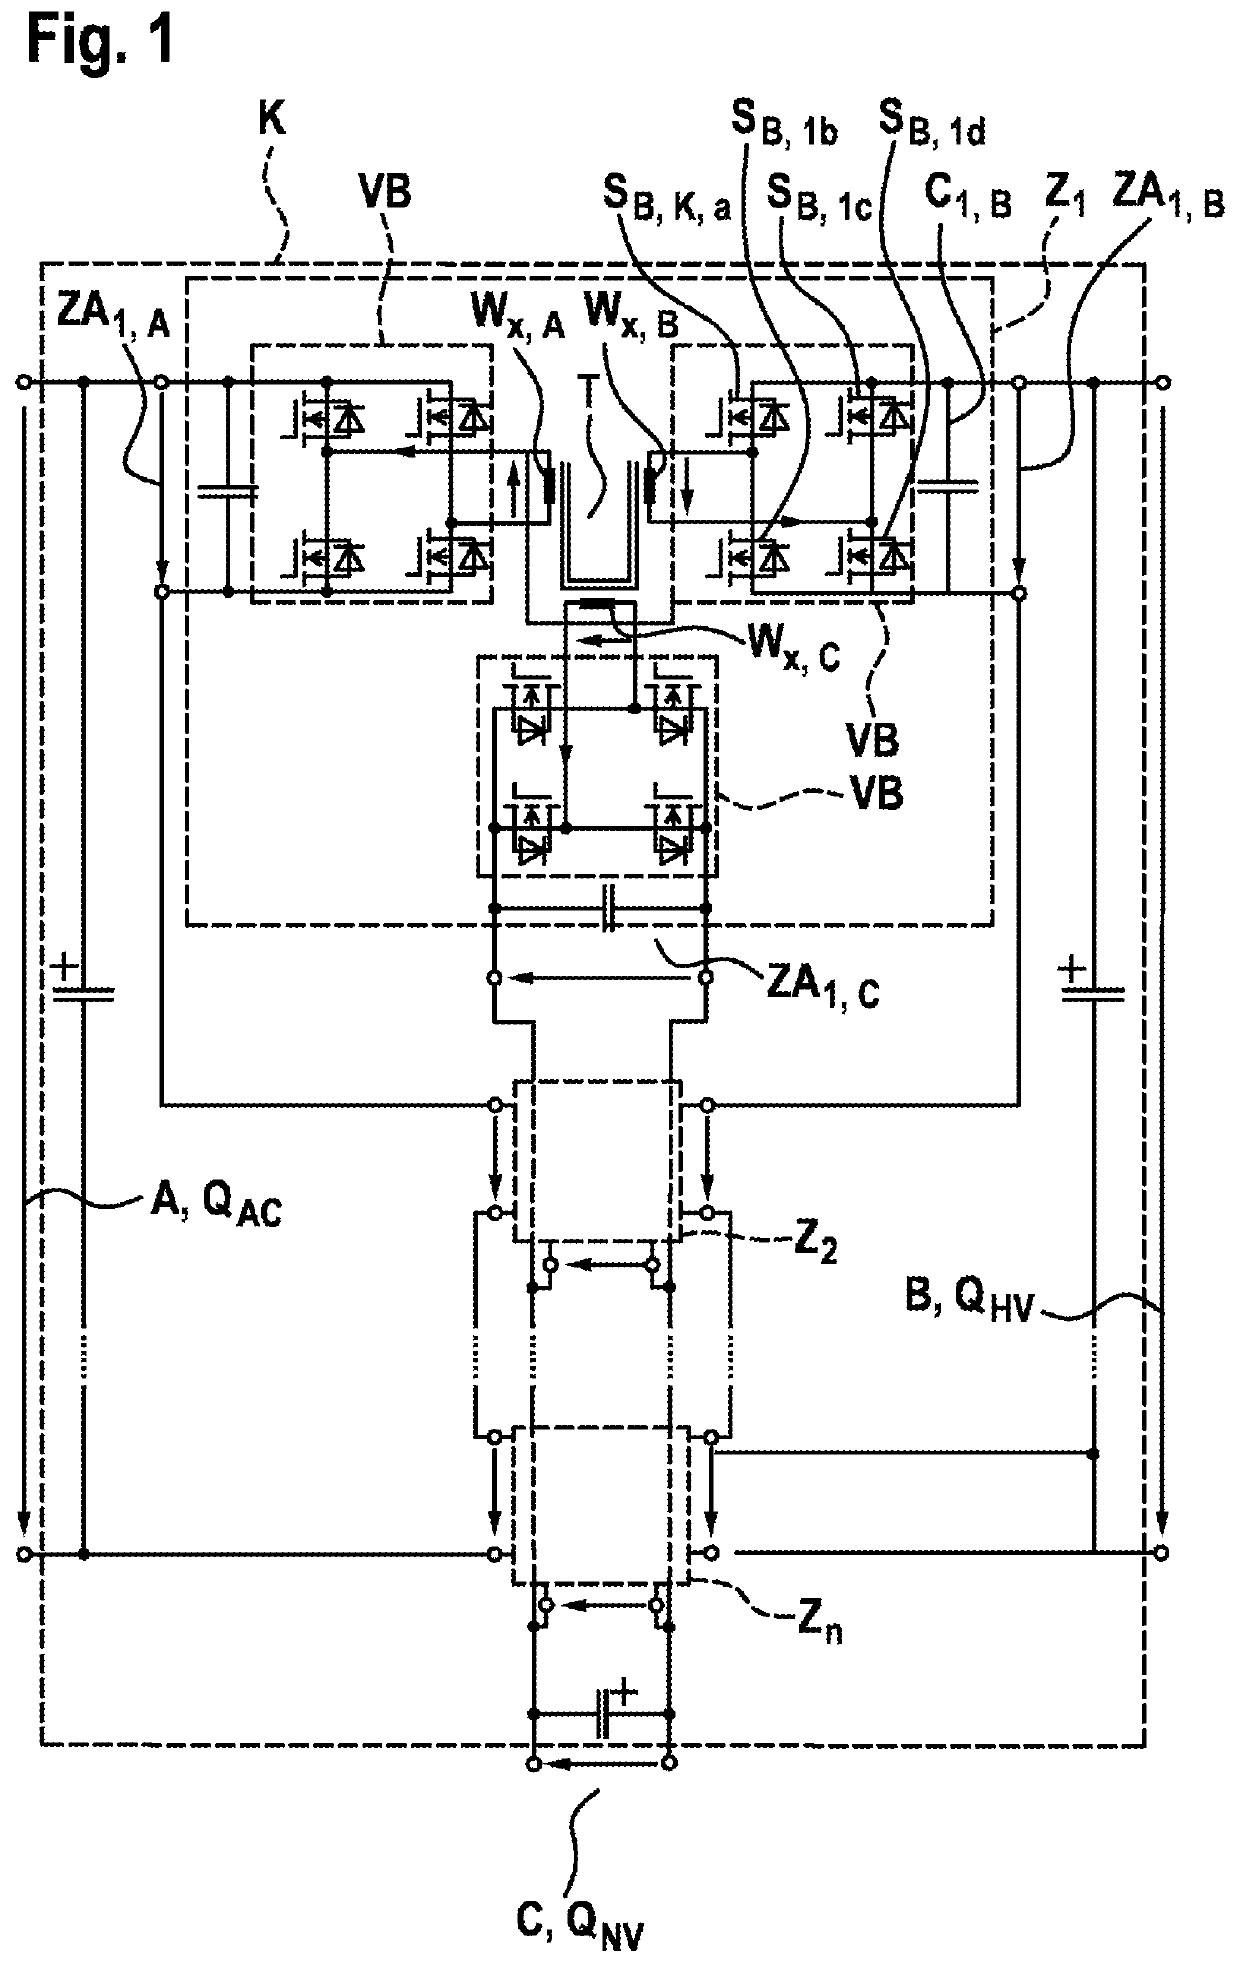 Isolated DC/DC converter for controlling power flows between three DC terminals